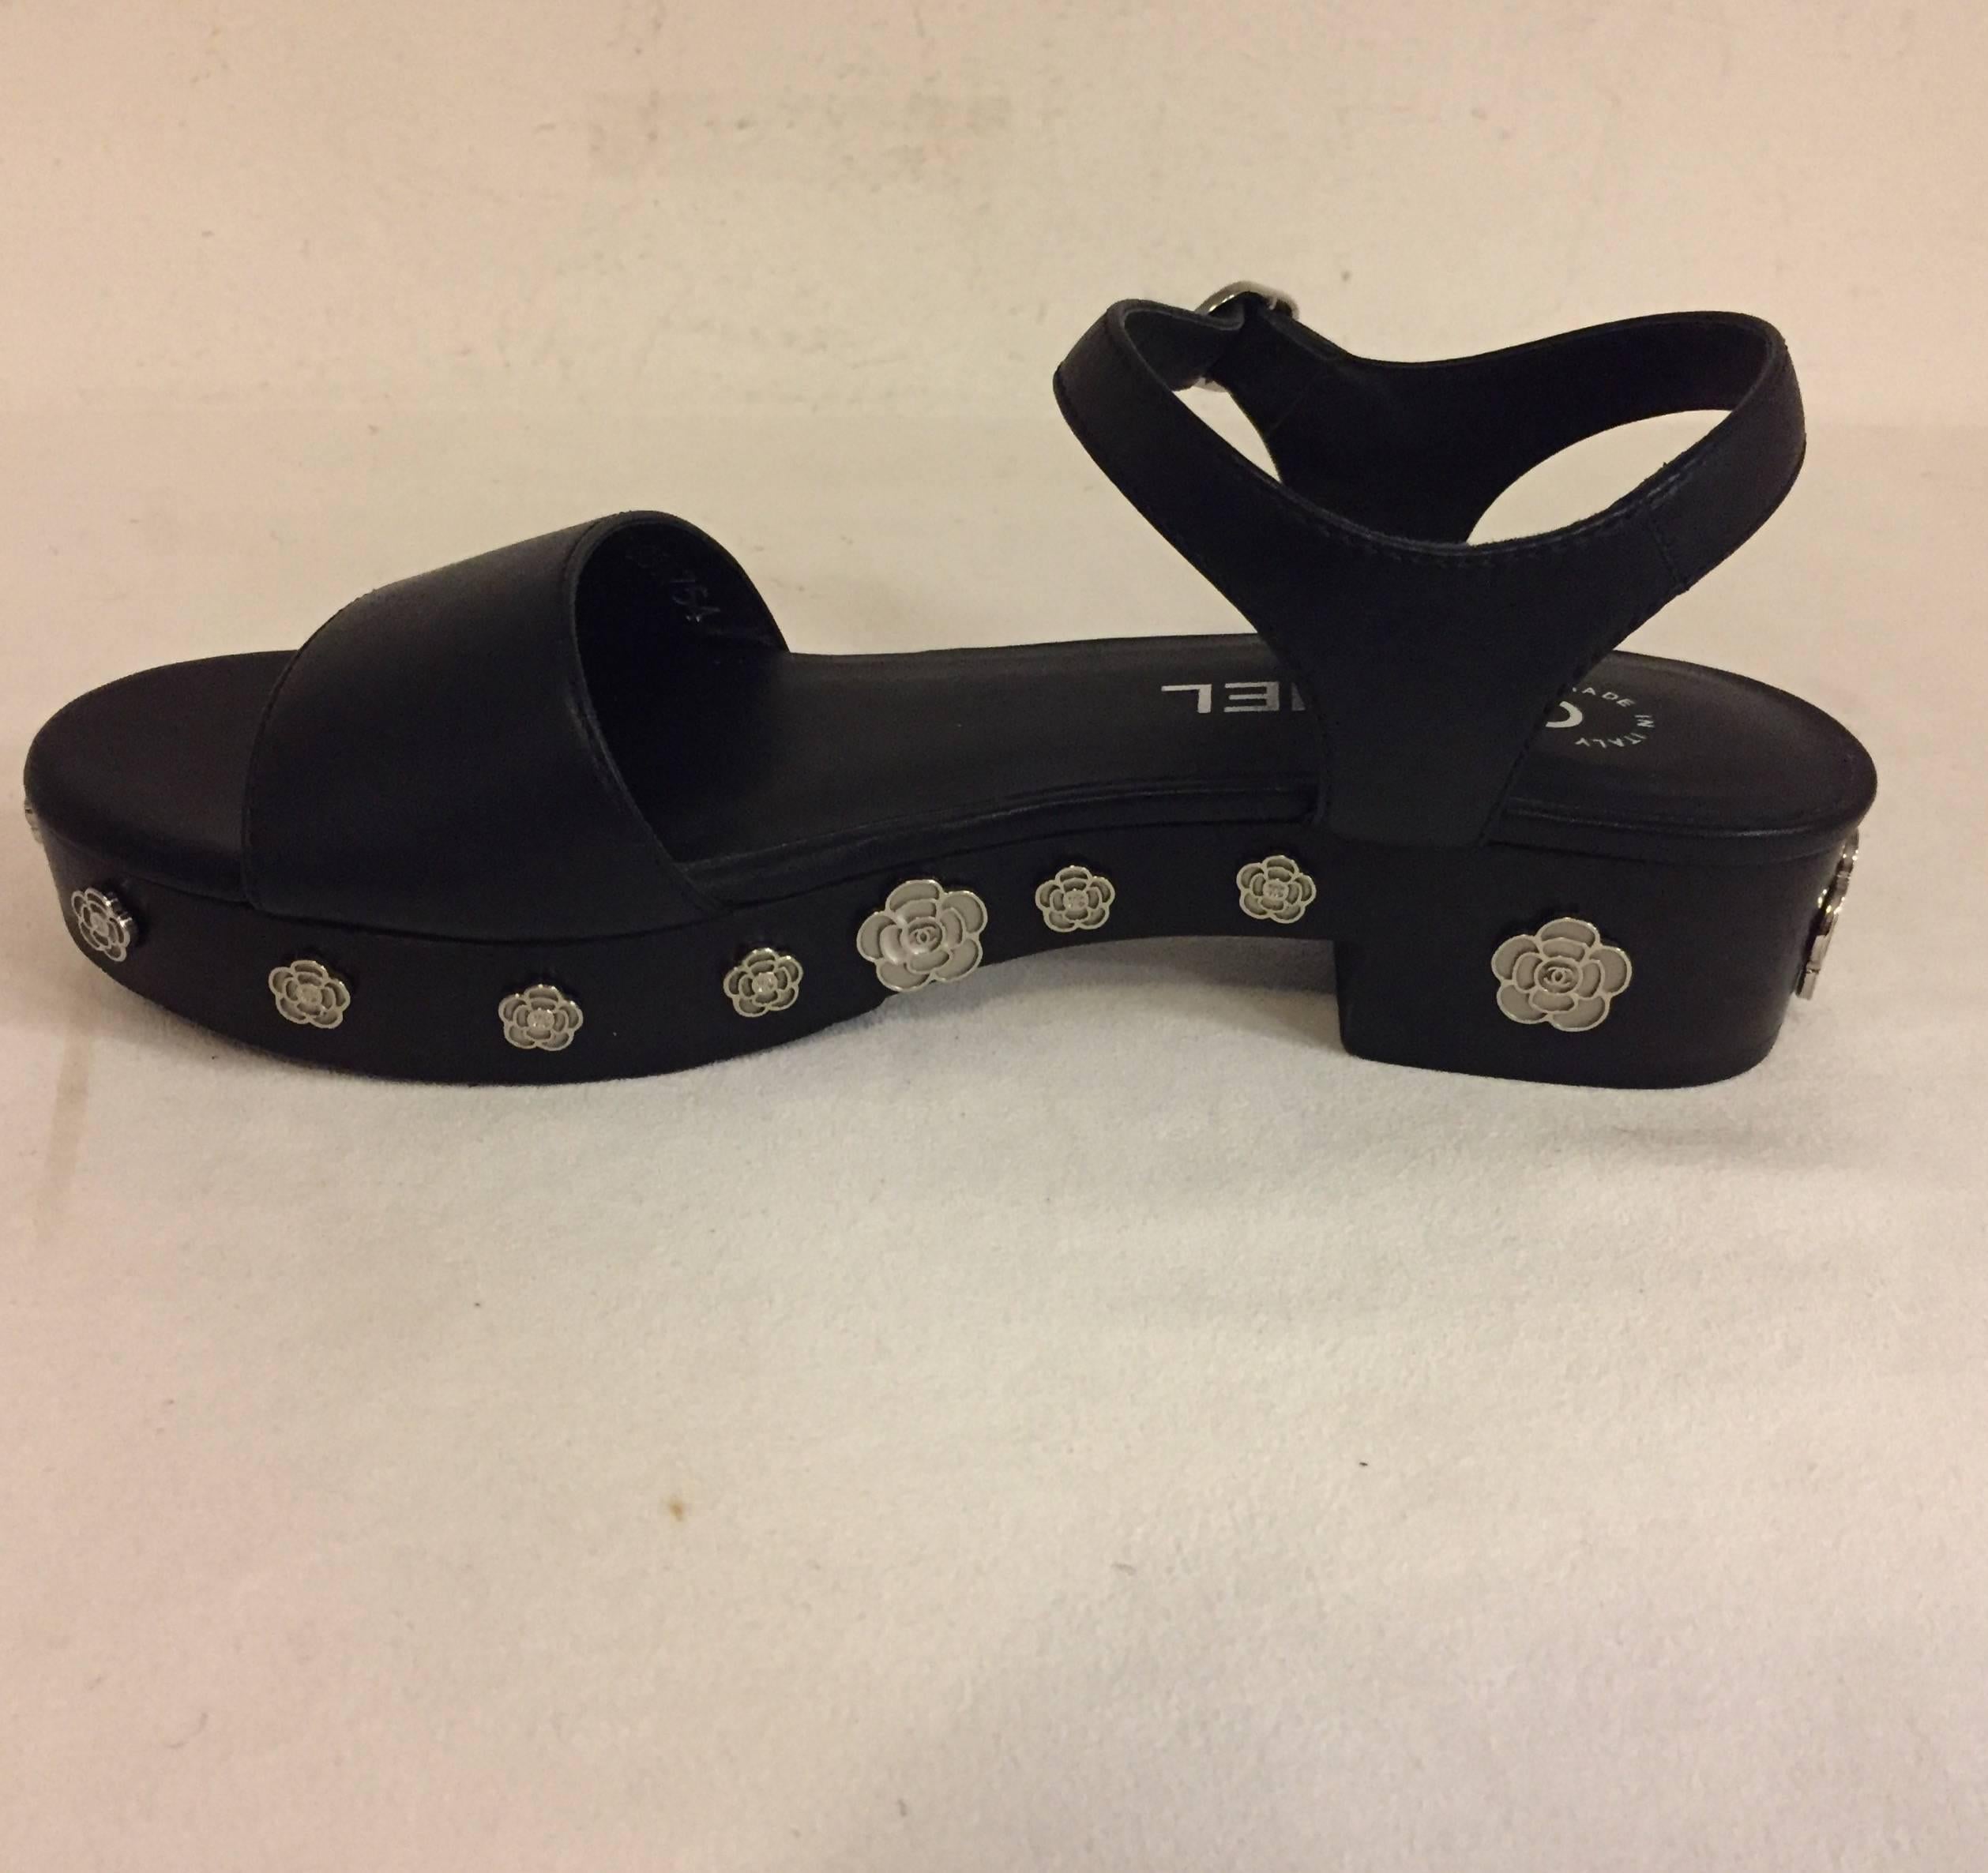 Chanel Camellia Sandals in Black with Silver Camellia Flowers on the Platforms In Excellent Condition For Sale In Palm Beach, FL